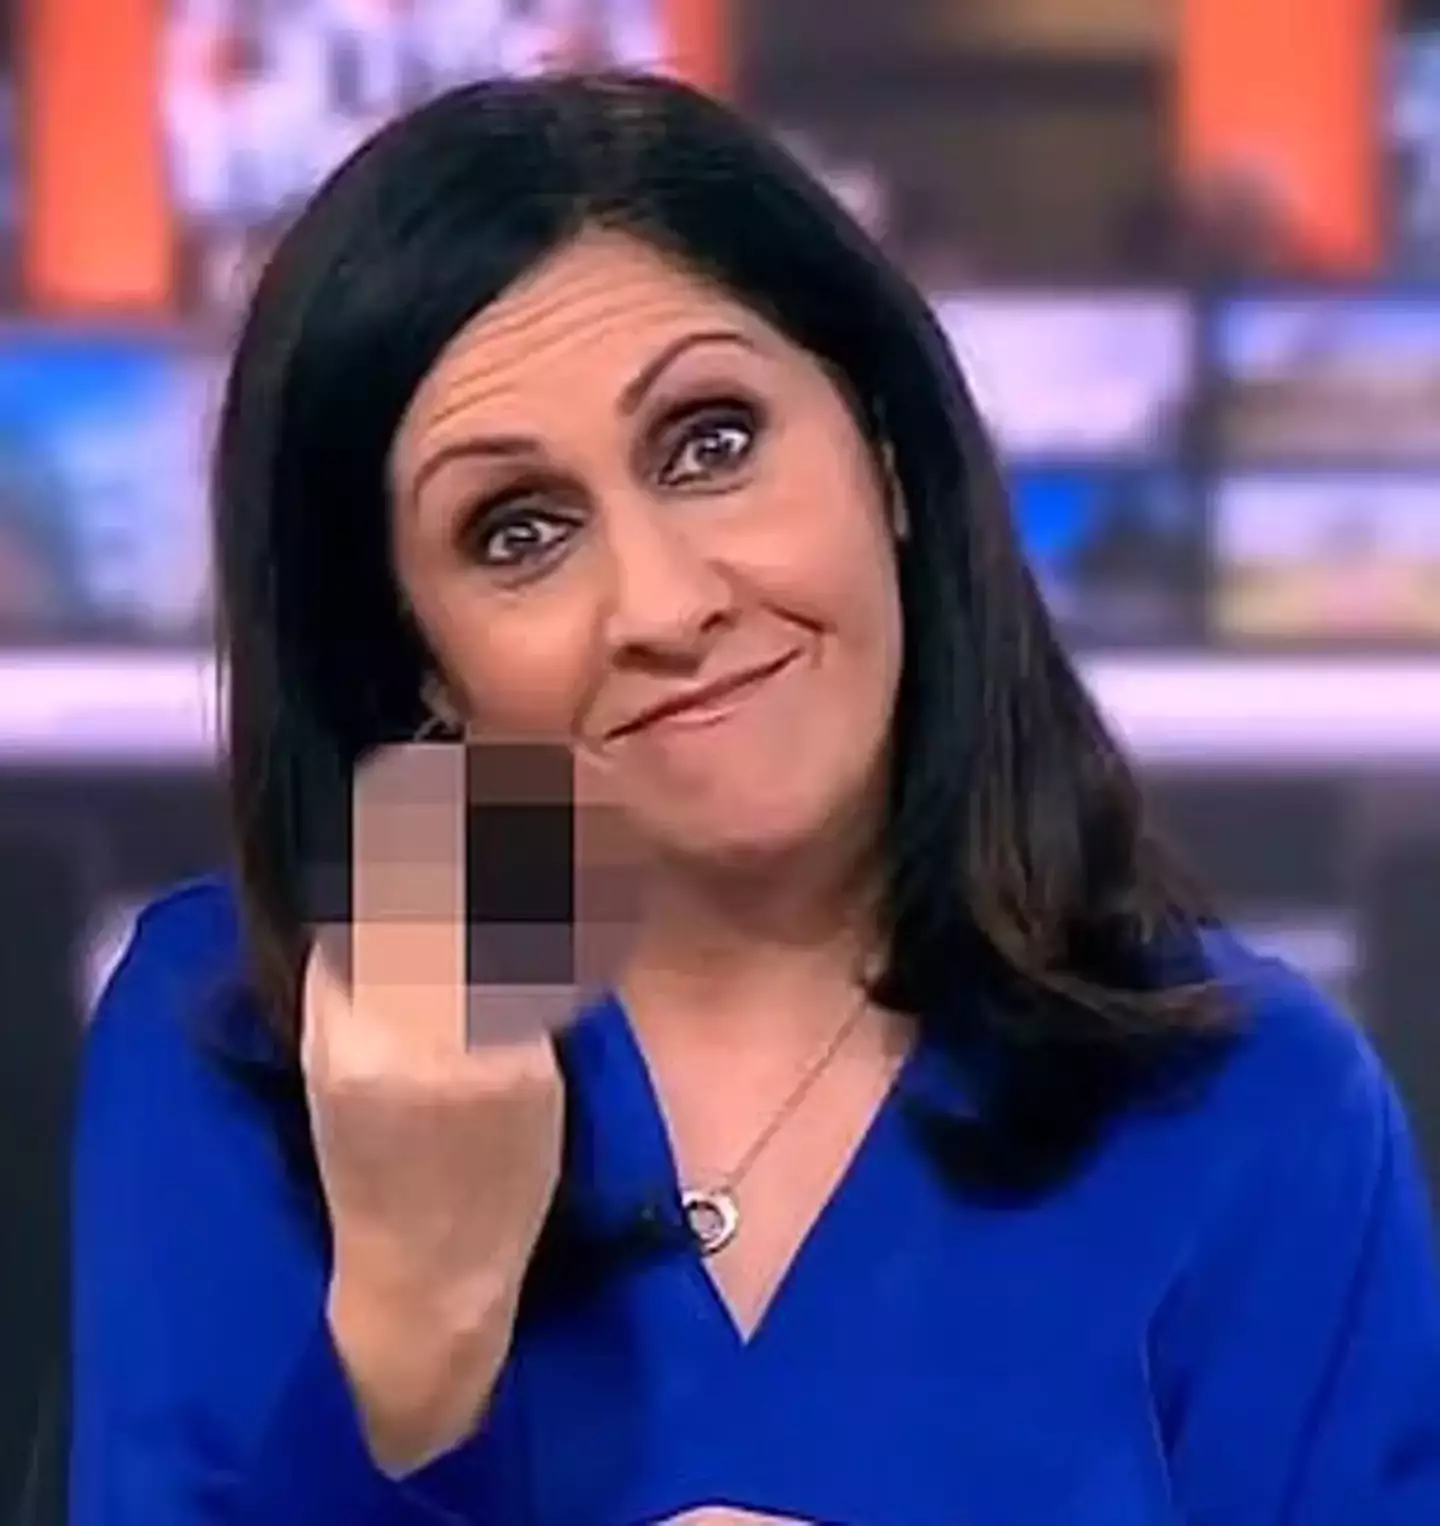 Maryam Moshiri went viral for unexpectedly flashing her middle finger live on-air.